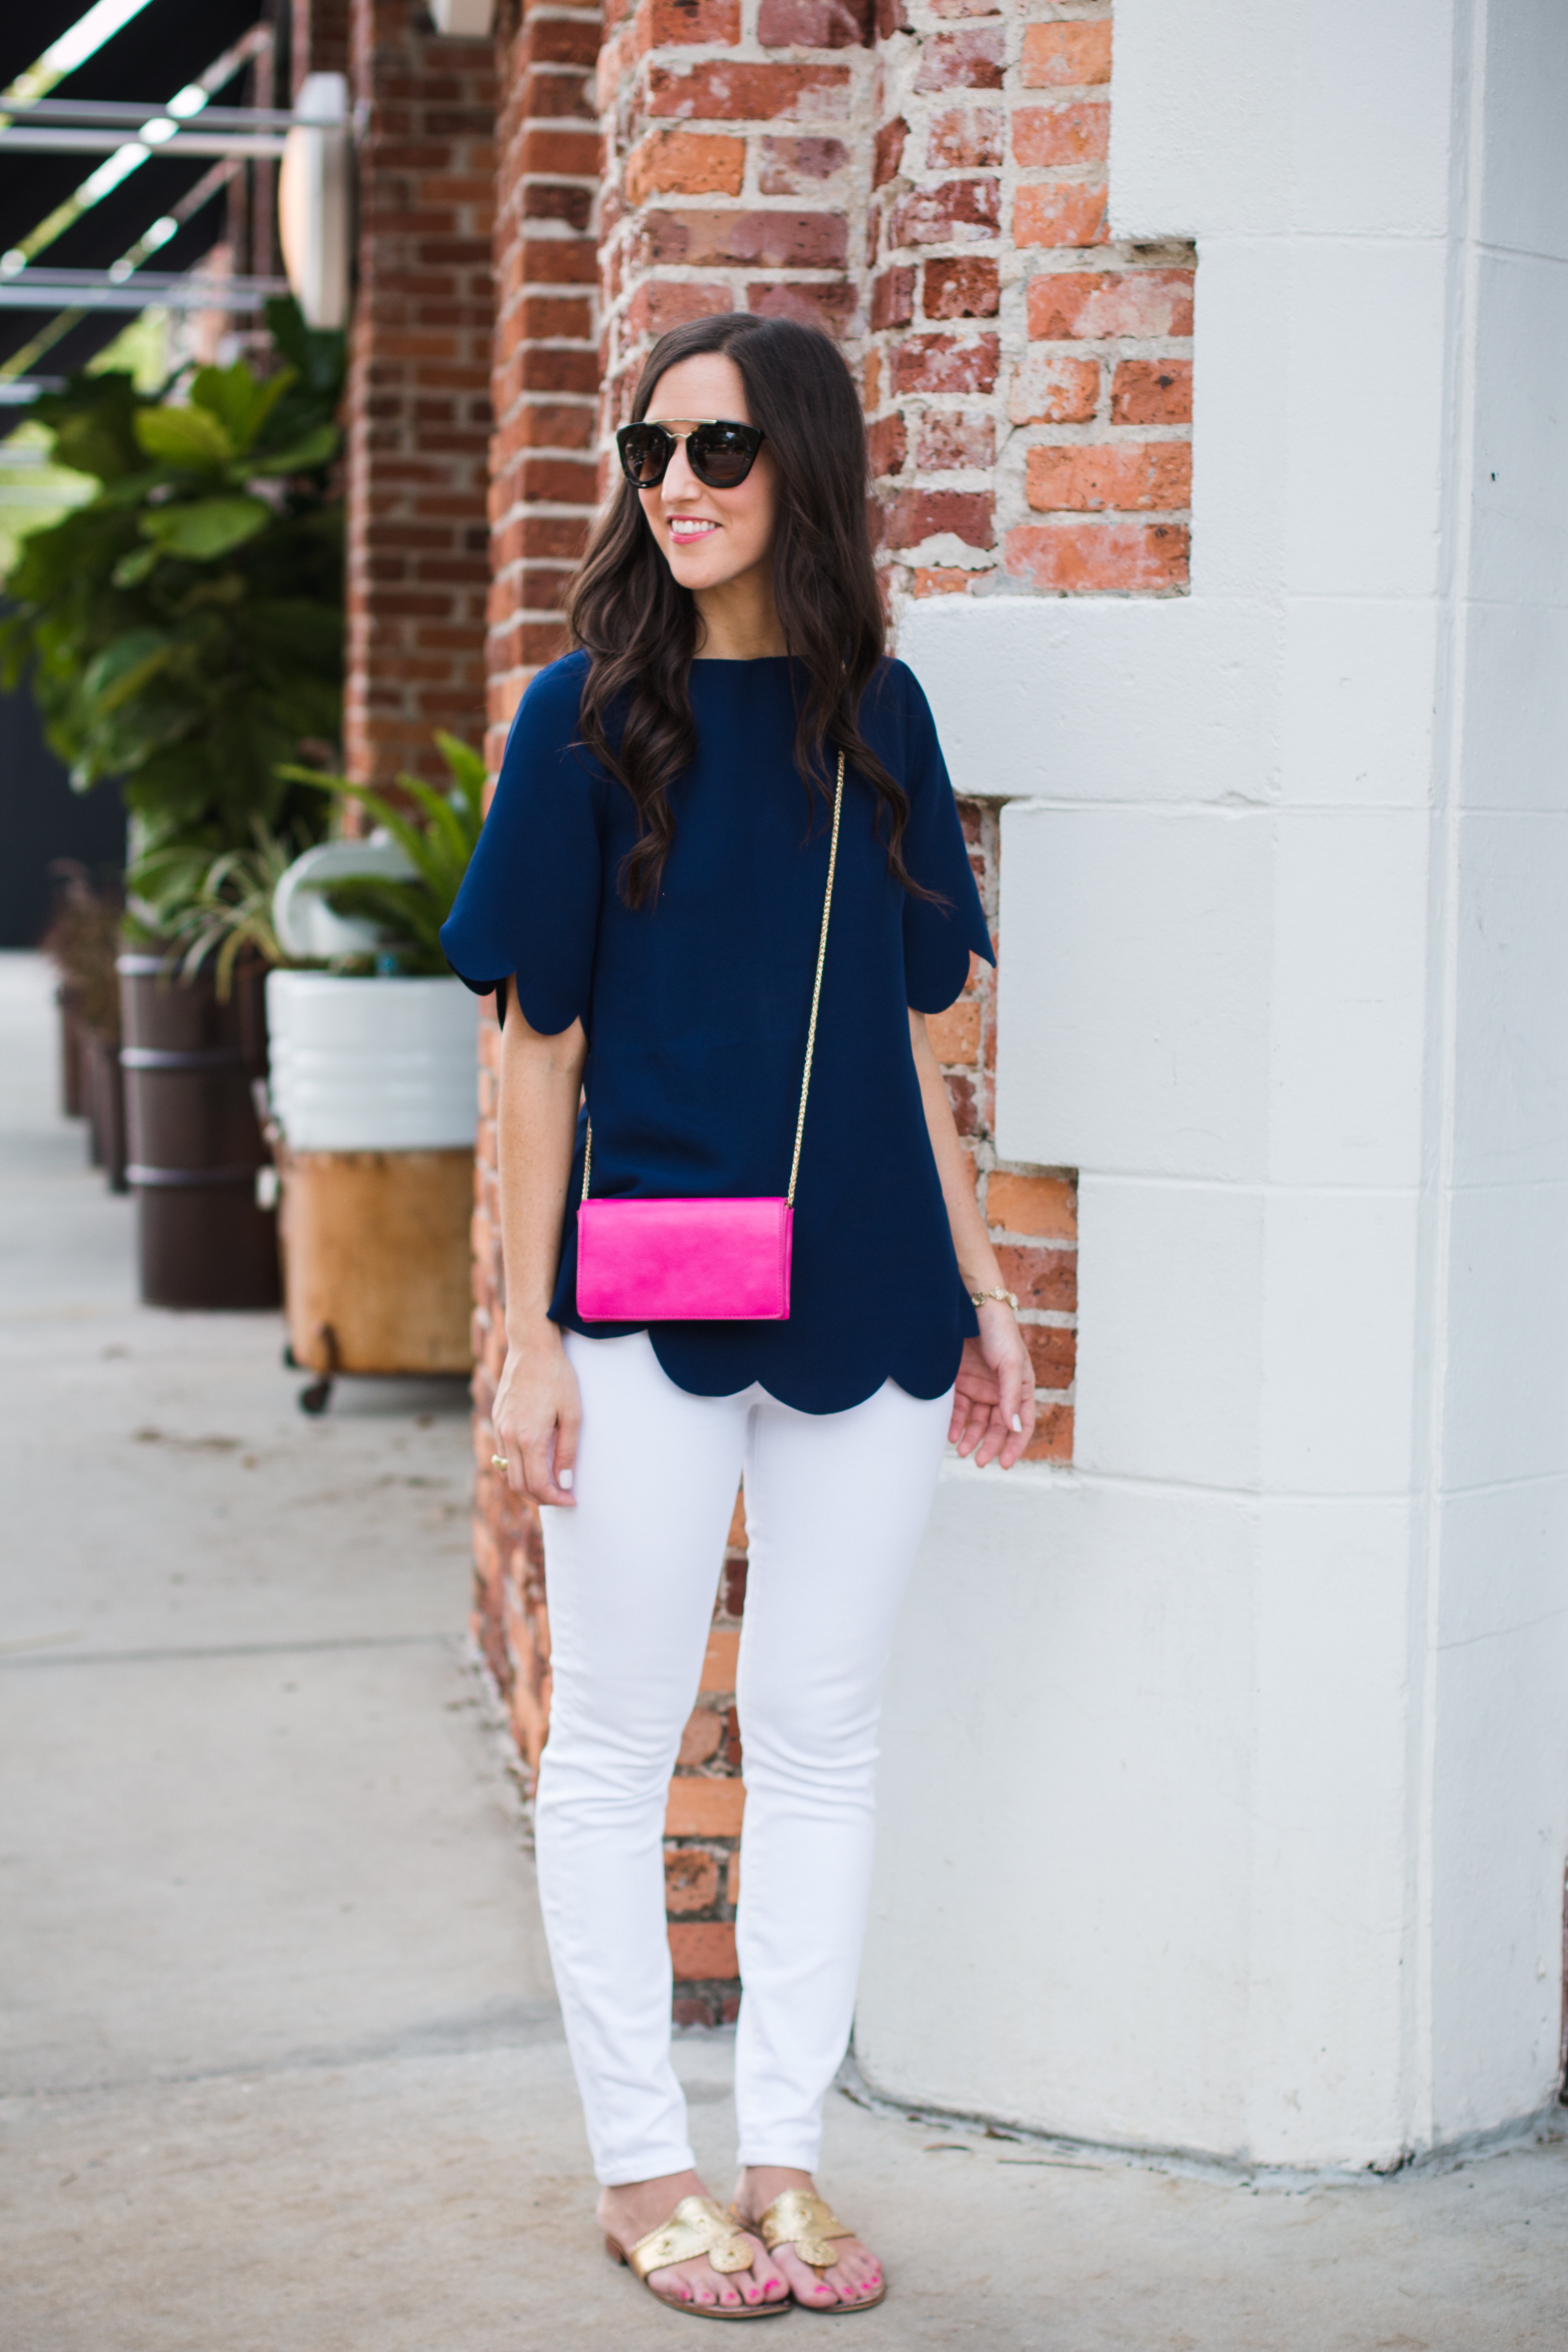 Toasting: scallop top + white jeans - Hosting & ToastingHosting & Toasting